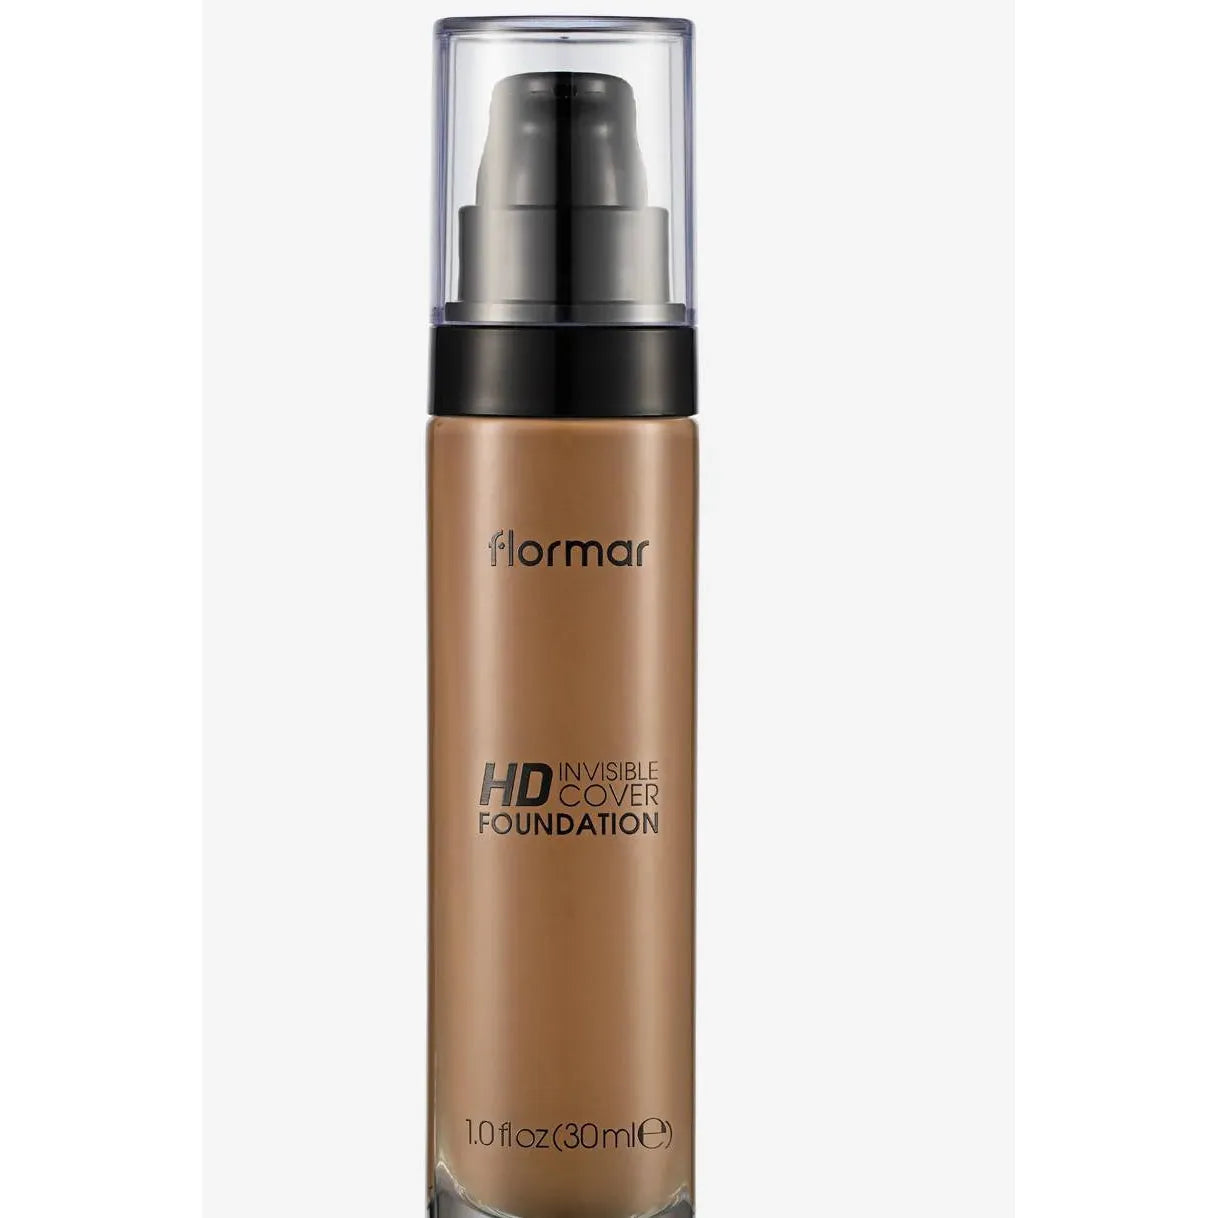 Flormar Invisible Cover Hd Foundation 130 Caramel